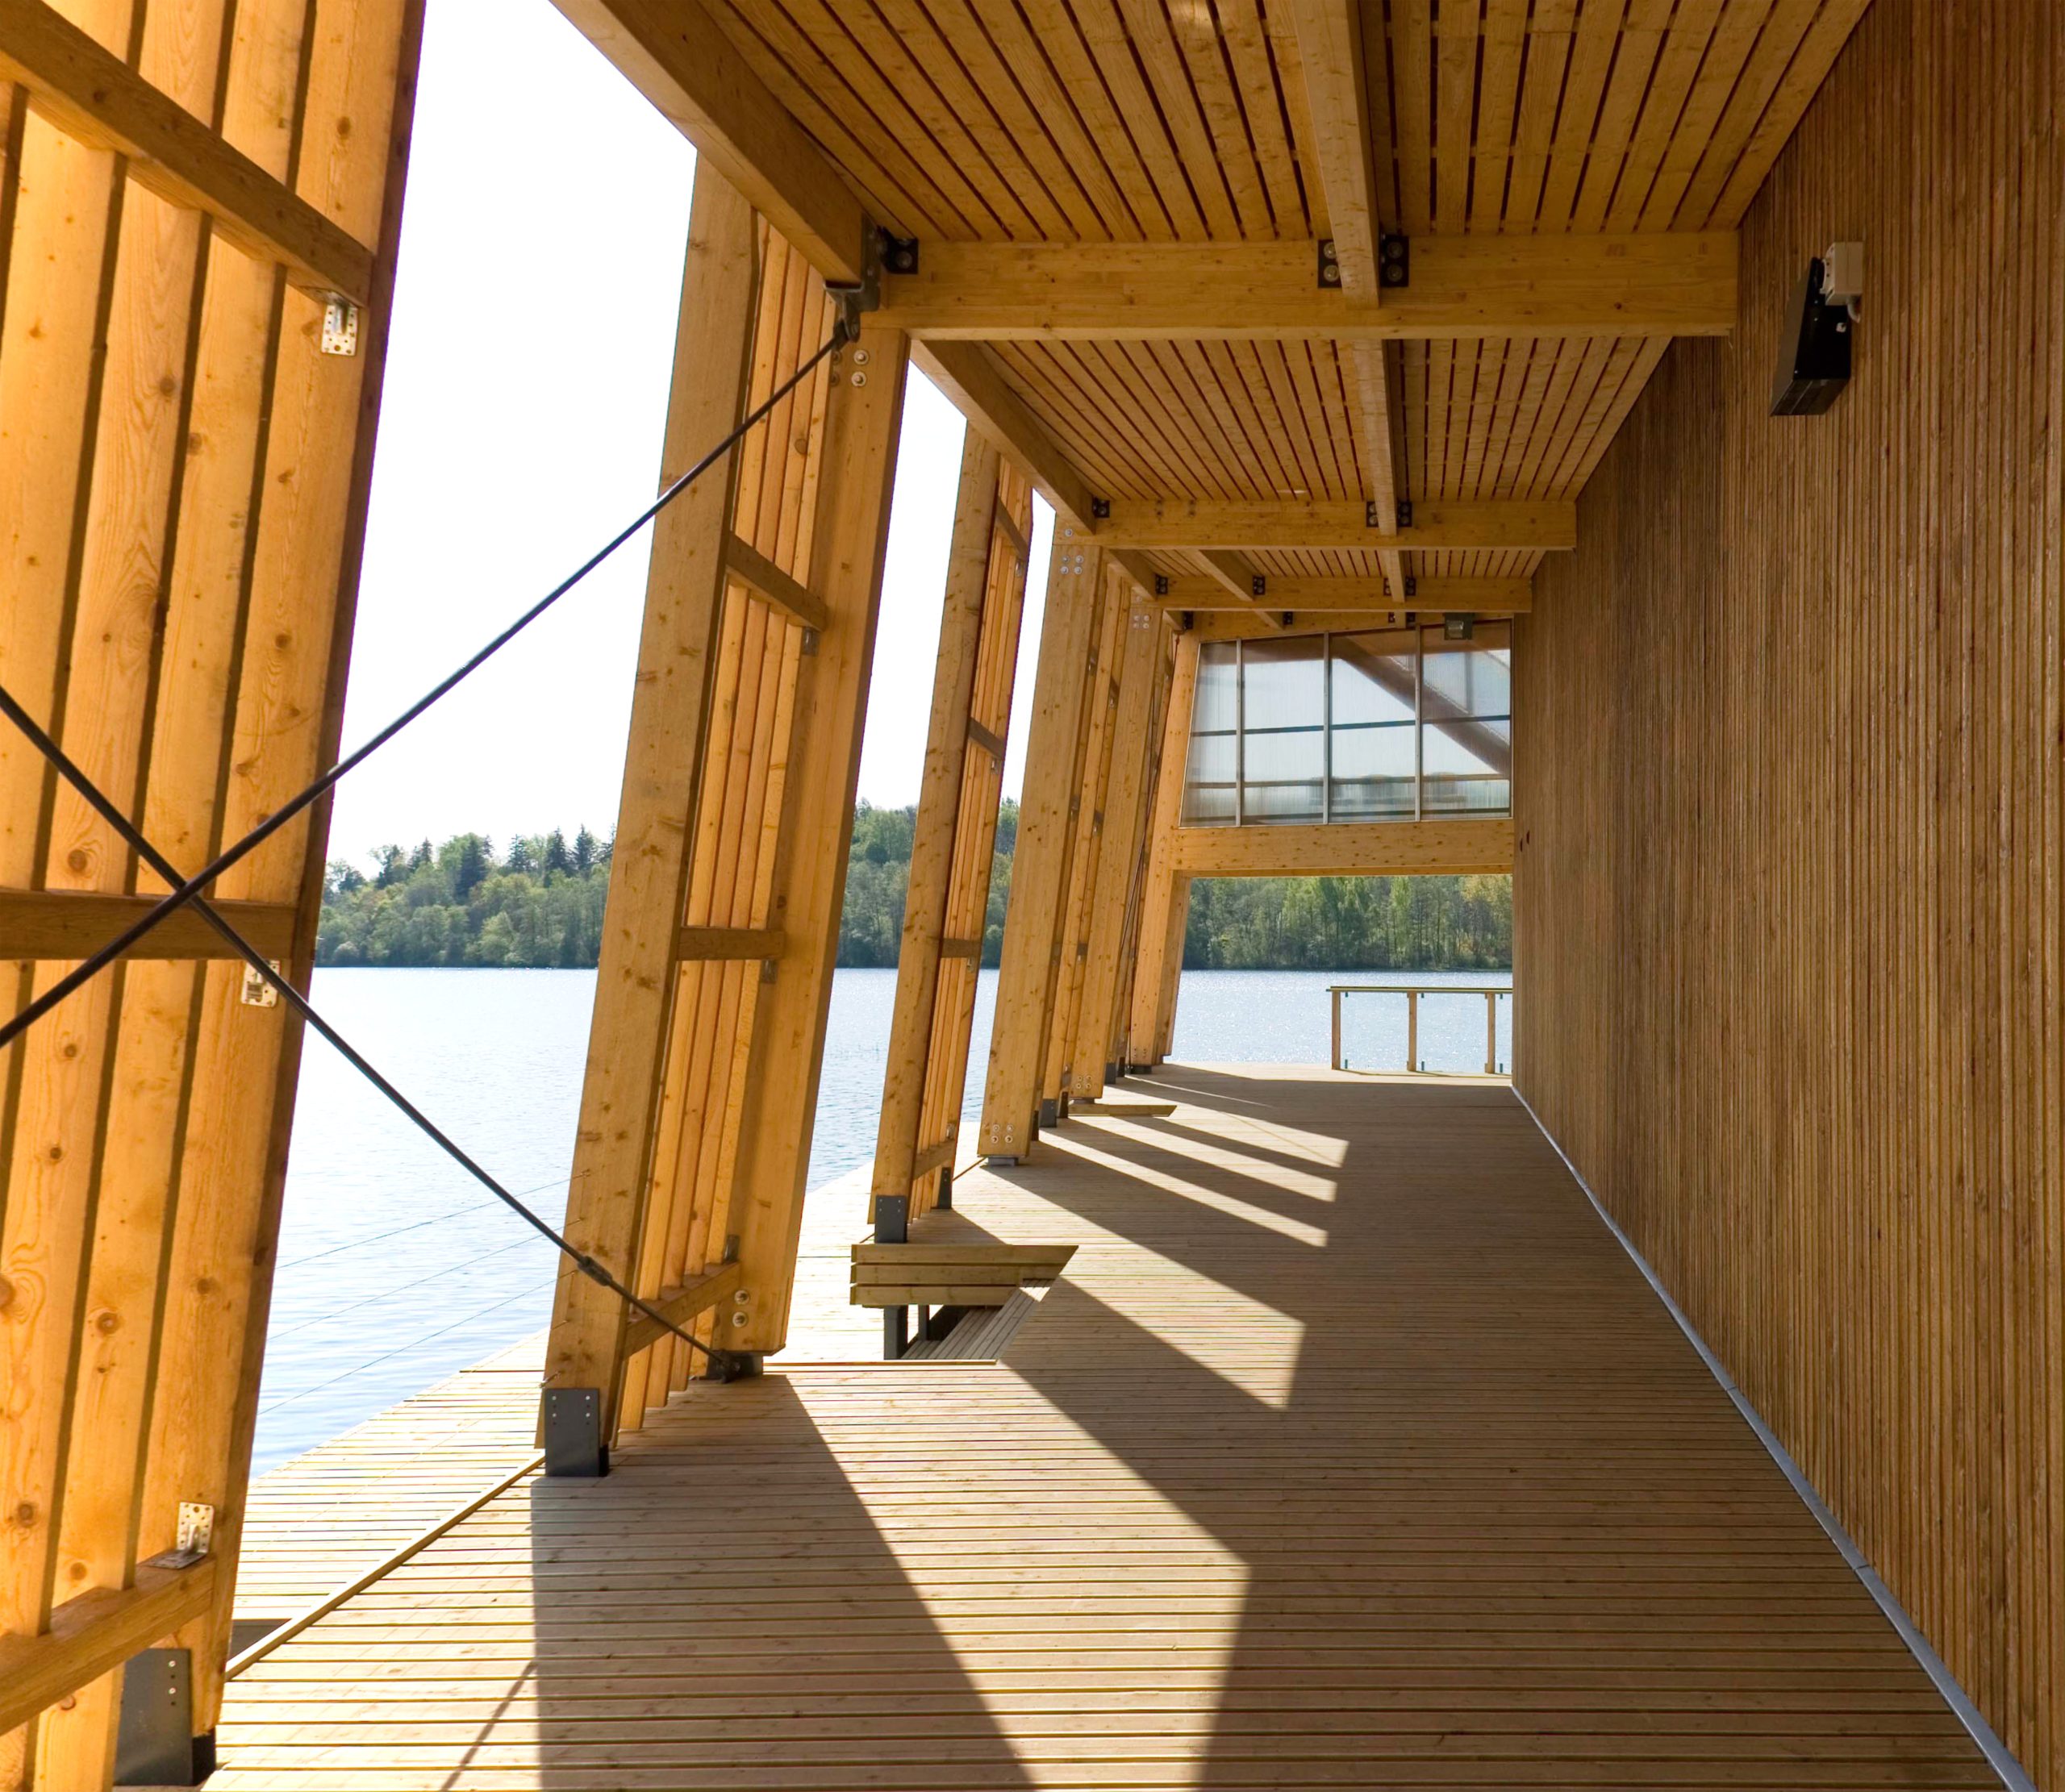 Exterior porch of wooden boathouse on river or waterfront.